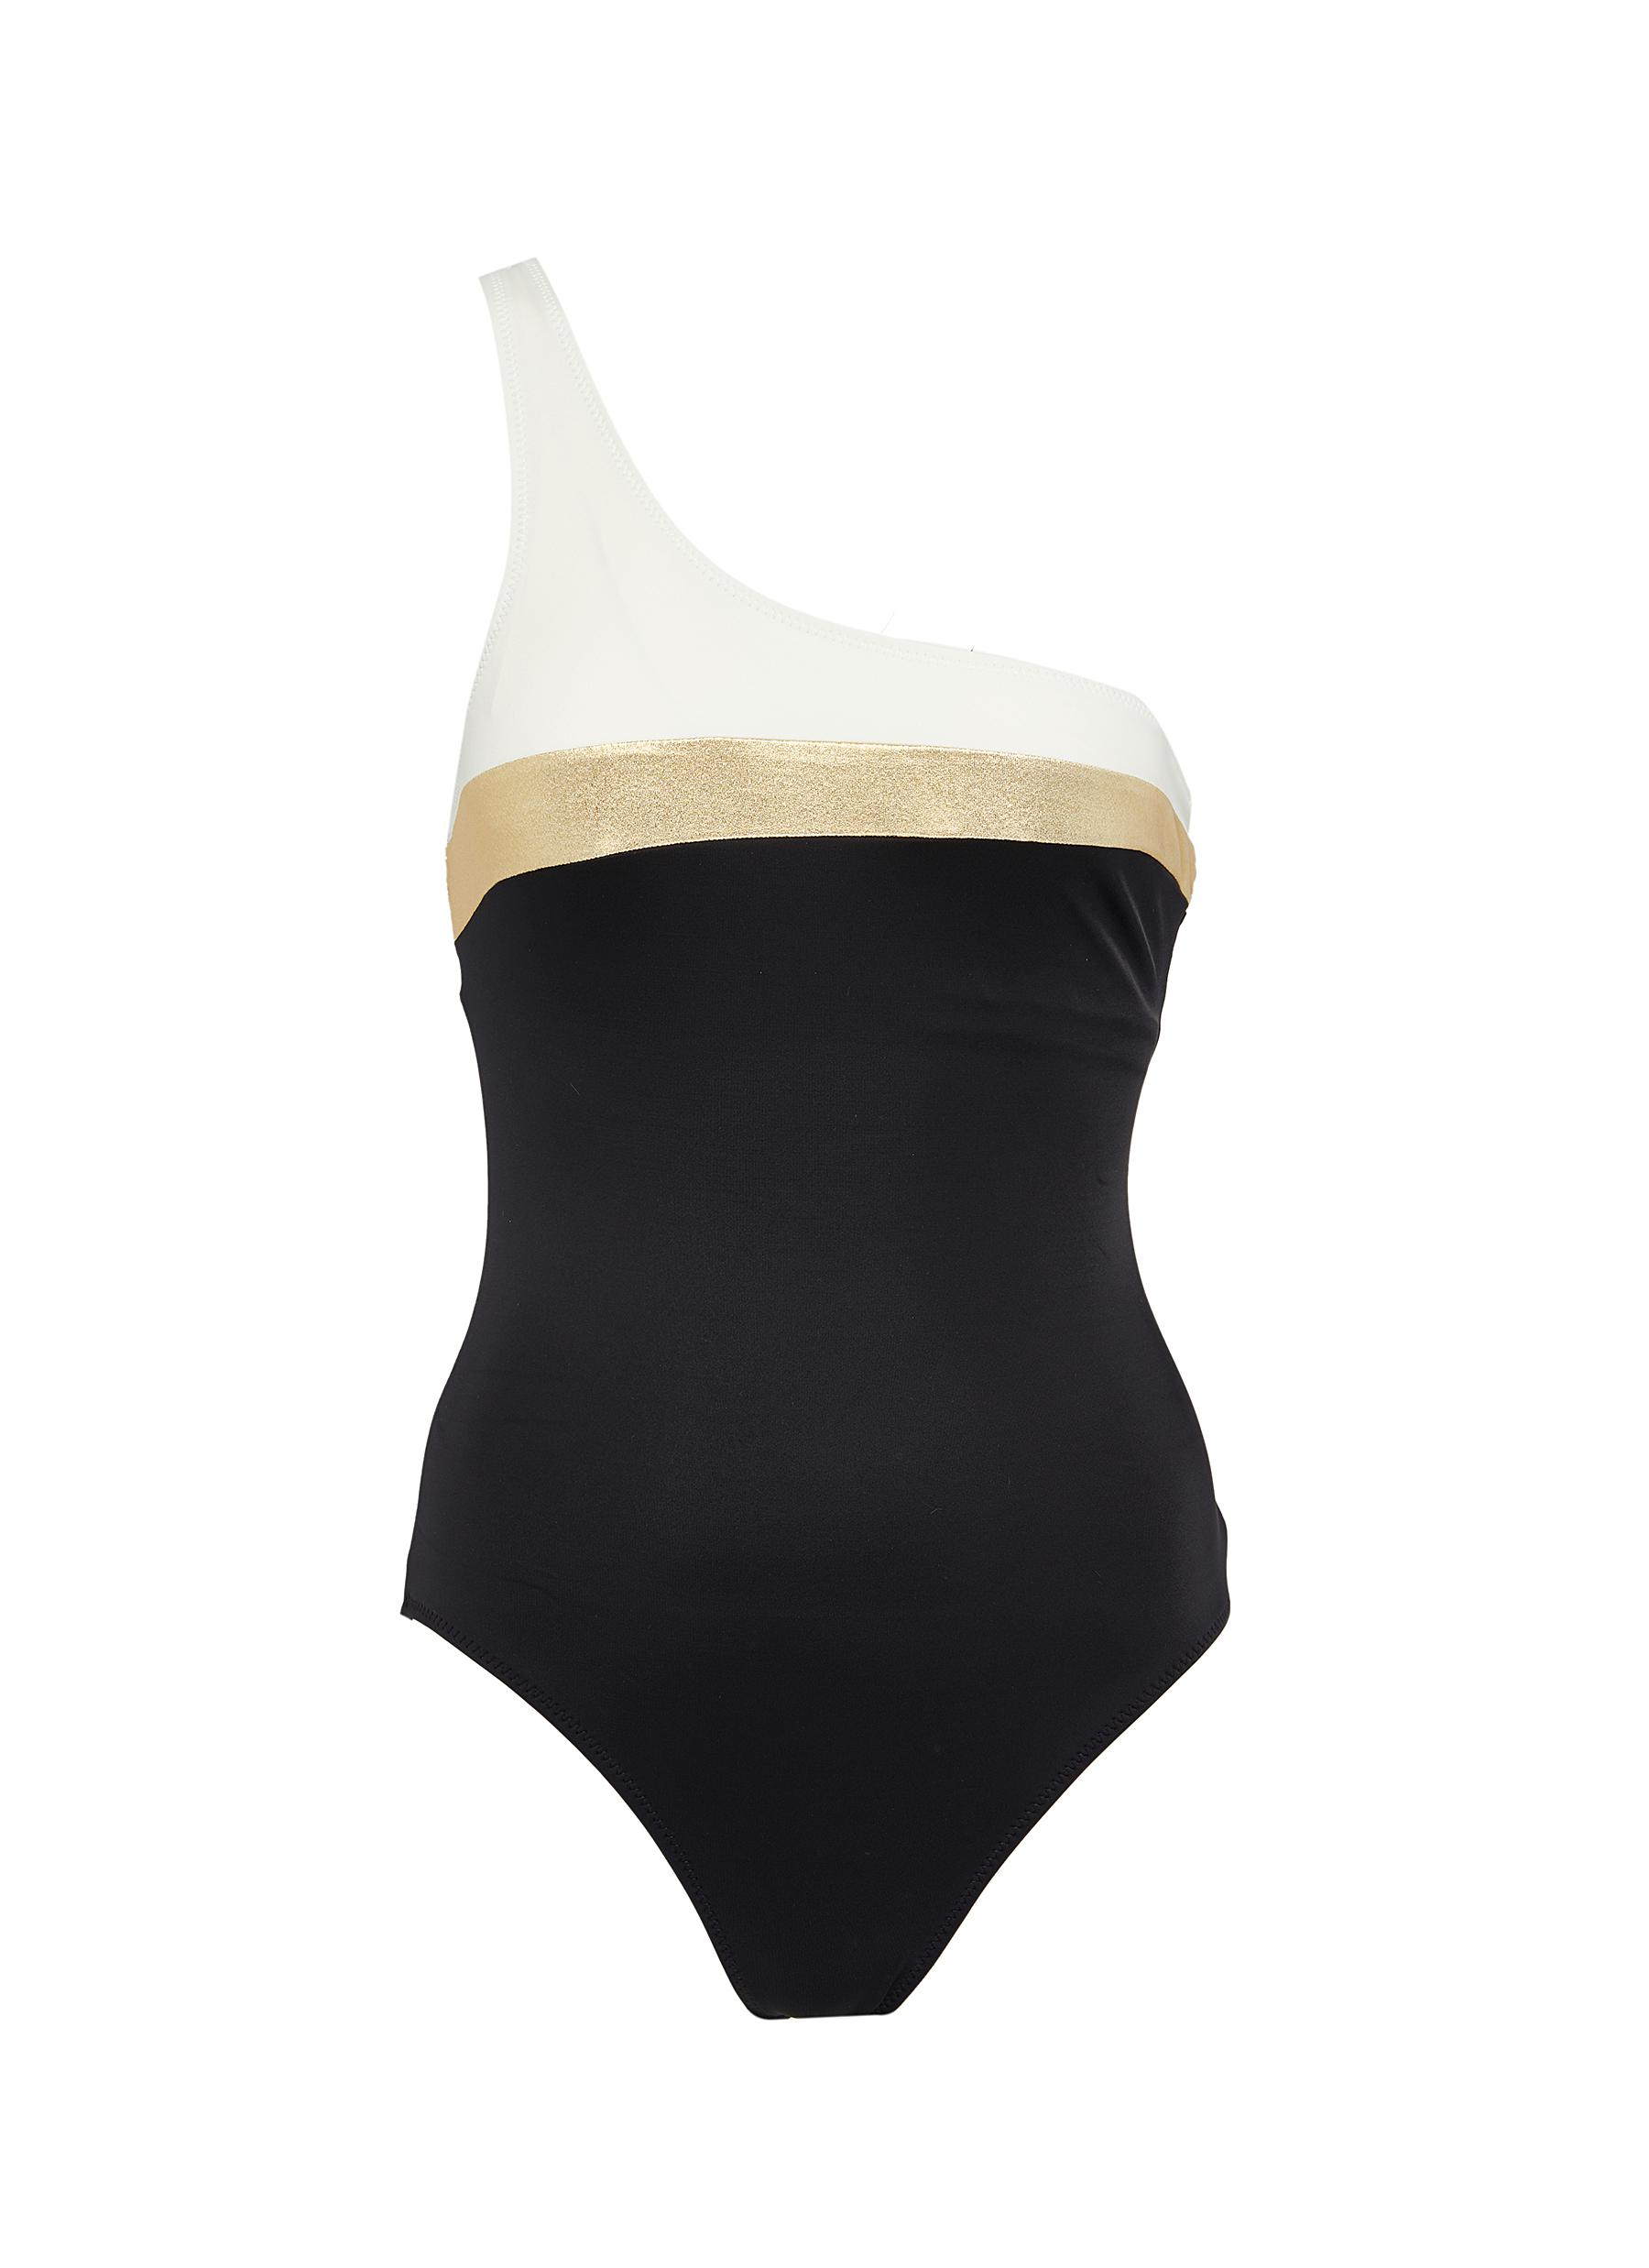 The Chloe colourblock one-shoulder one-piece swimsuit by Solid & Striped